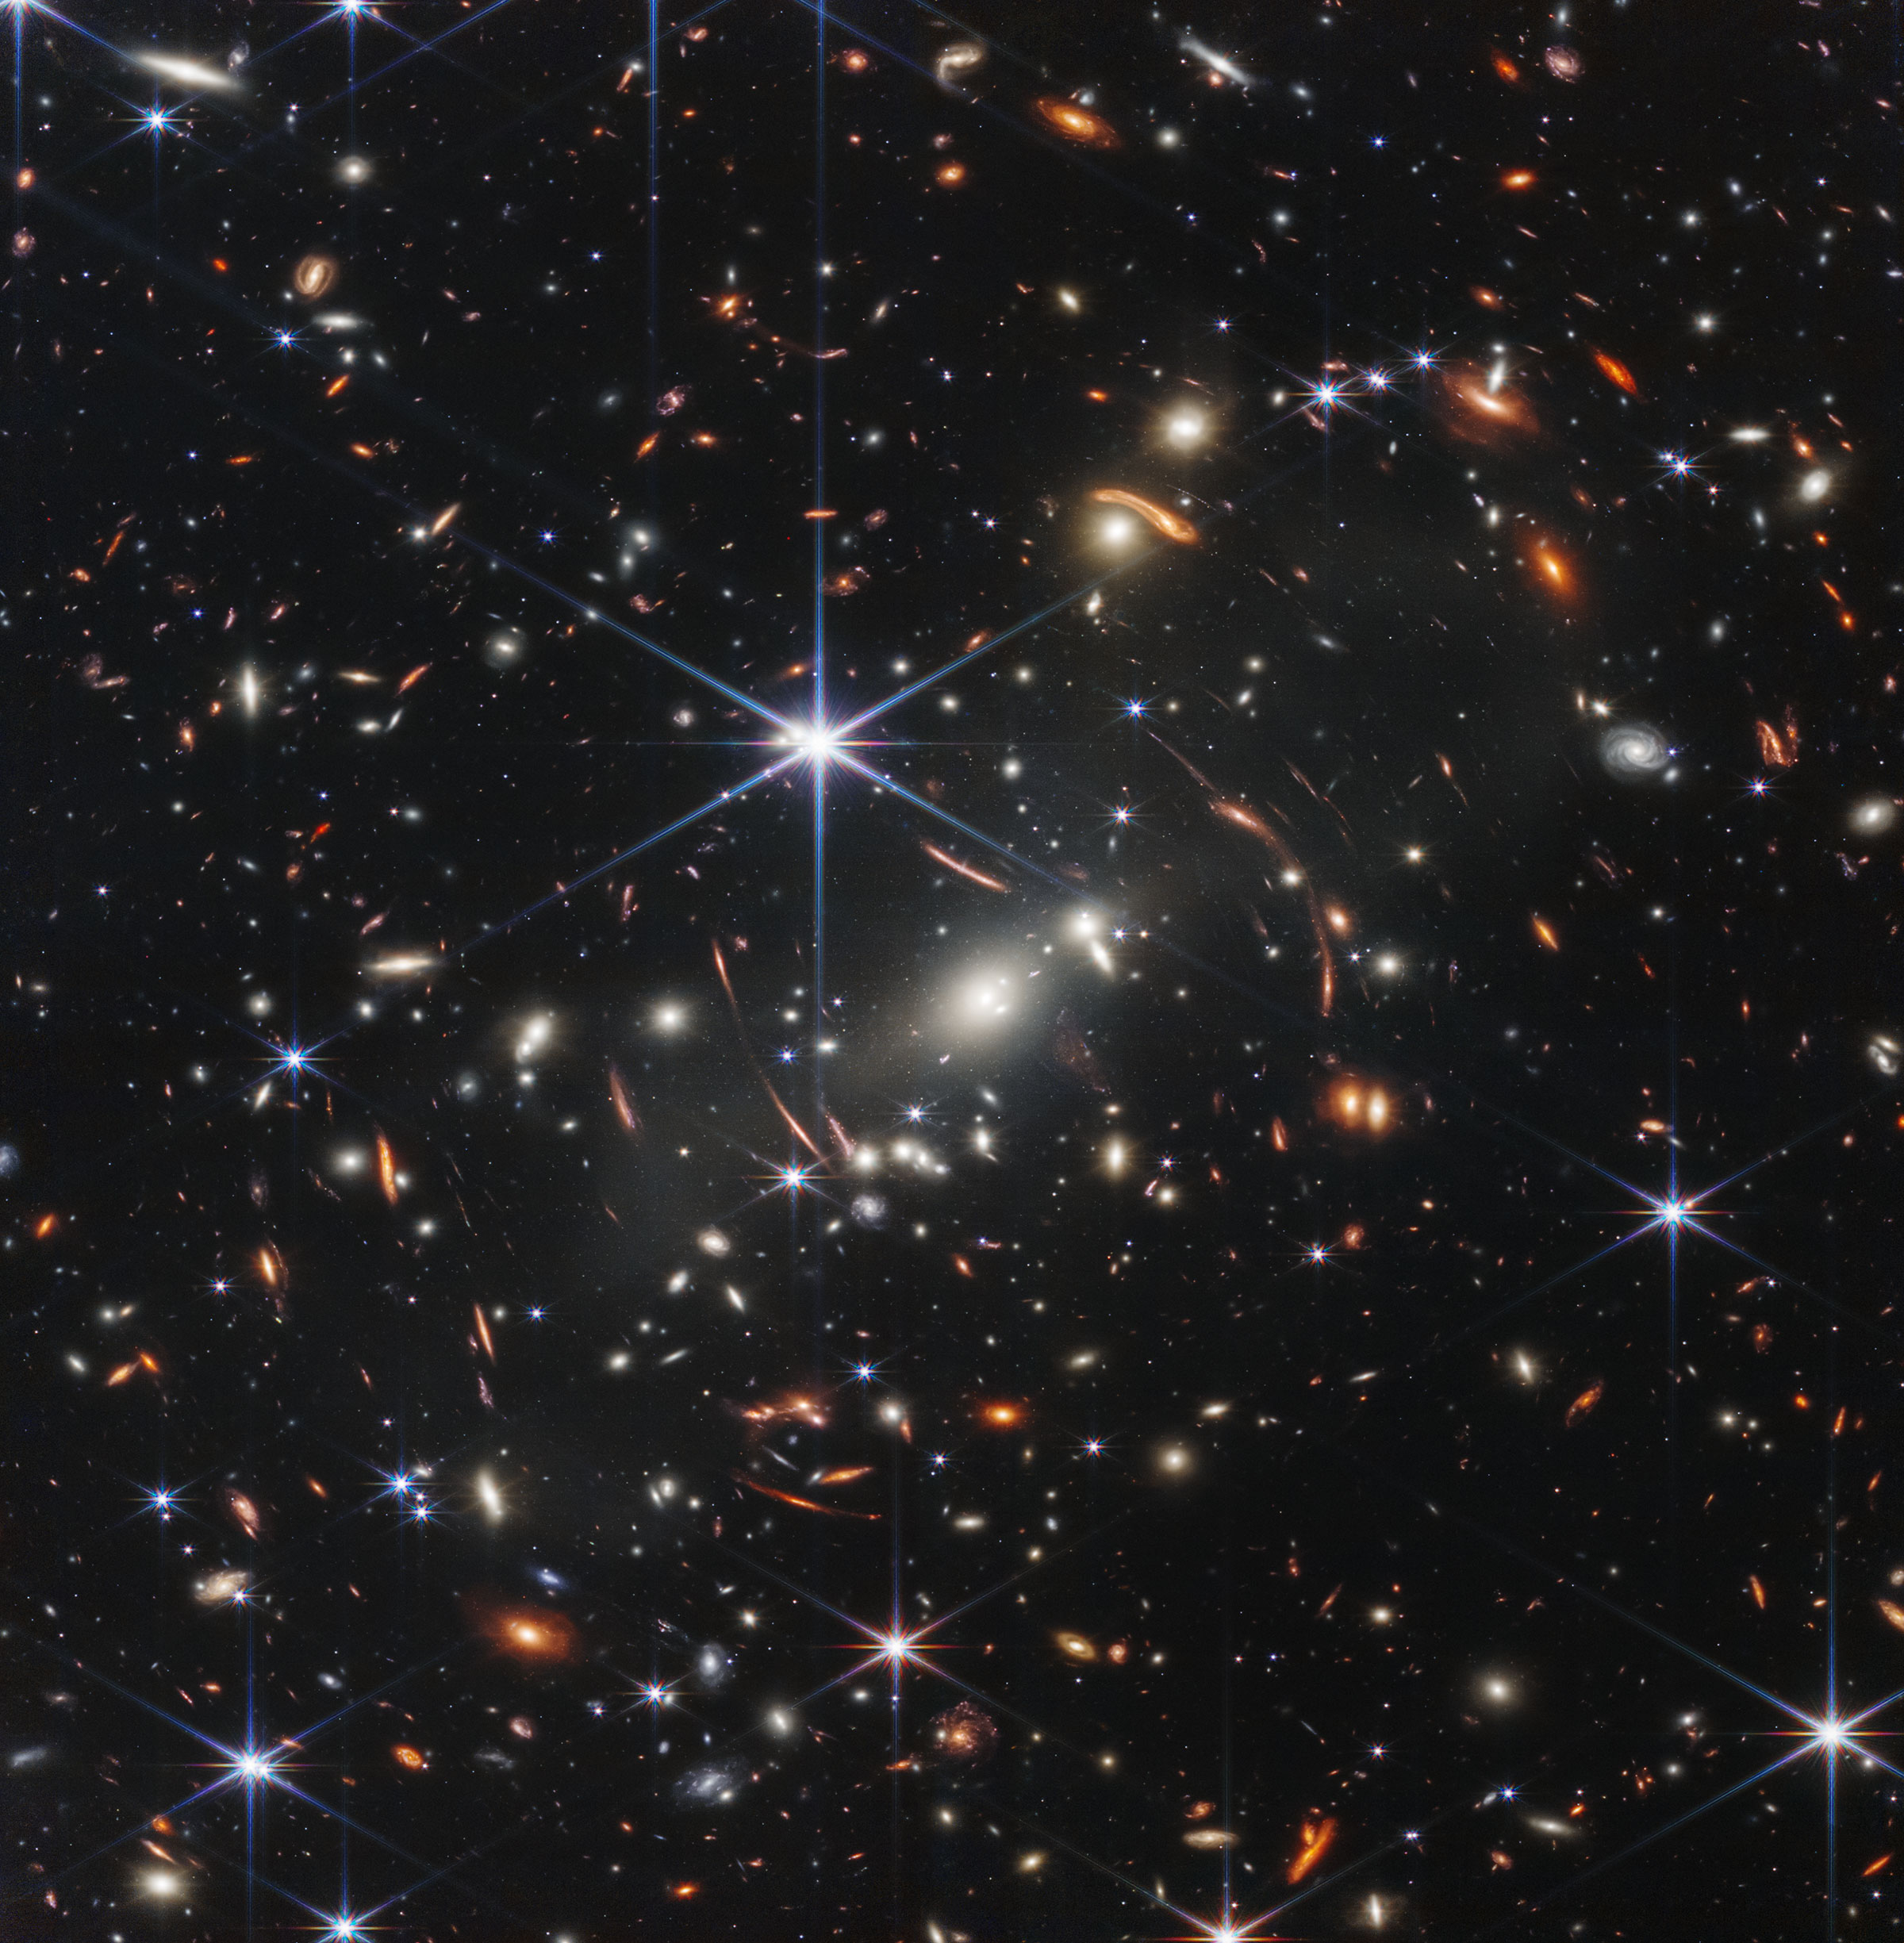 One of the first images from NASA’s James Webb Space Telescope showing galaxy cluster SMACS 0723. (NASA, ESA, CSA, STScI, Webb ERO)